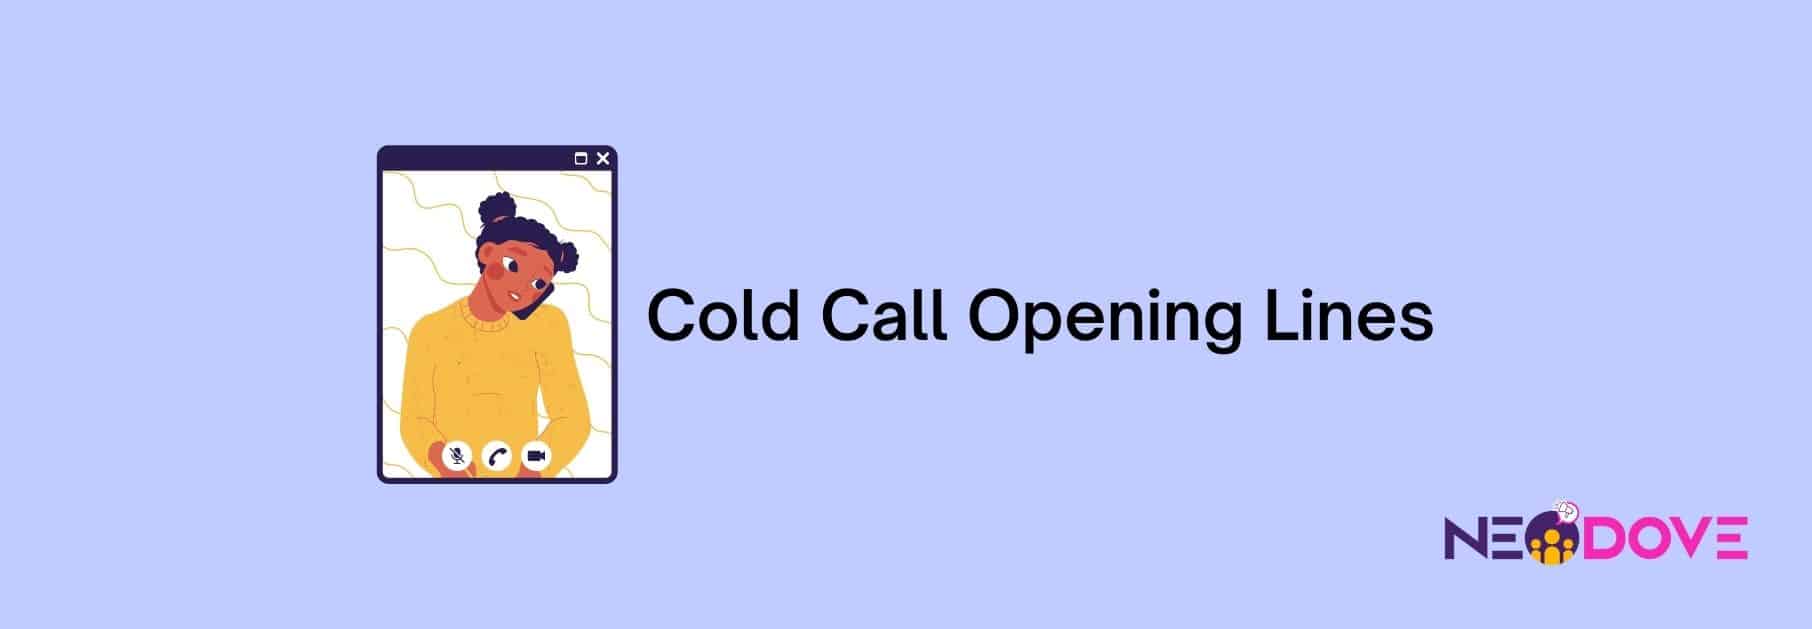 cold call opening lines